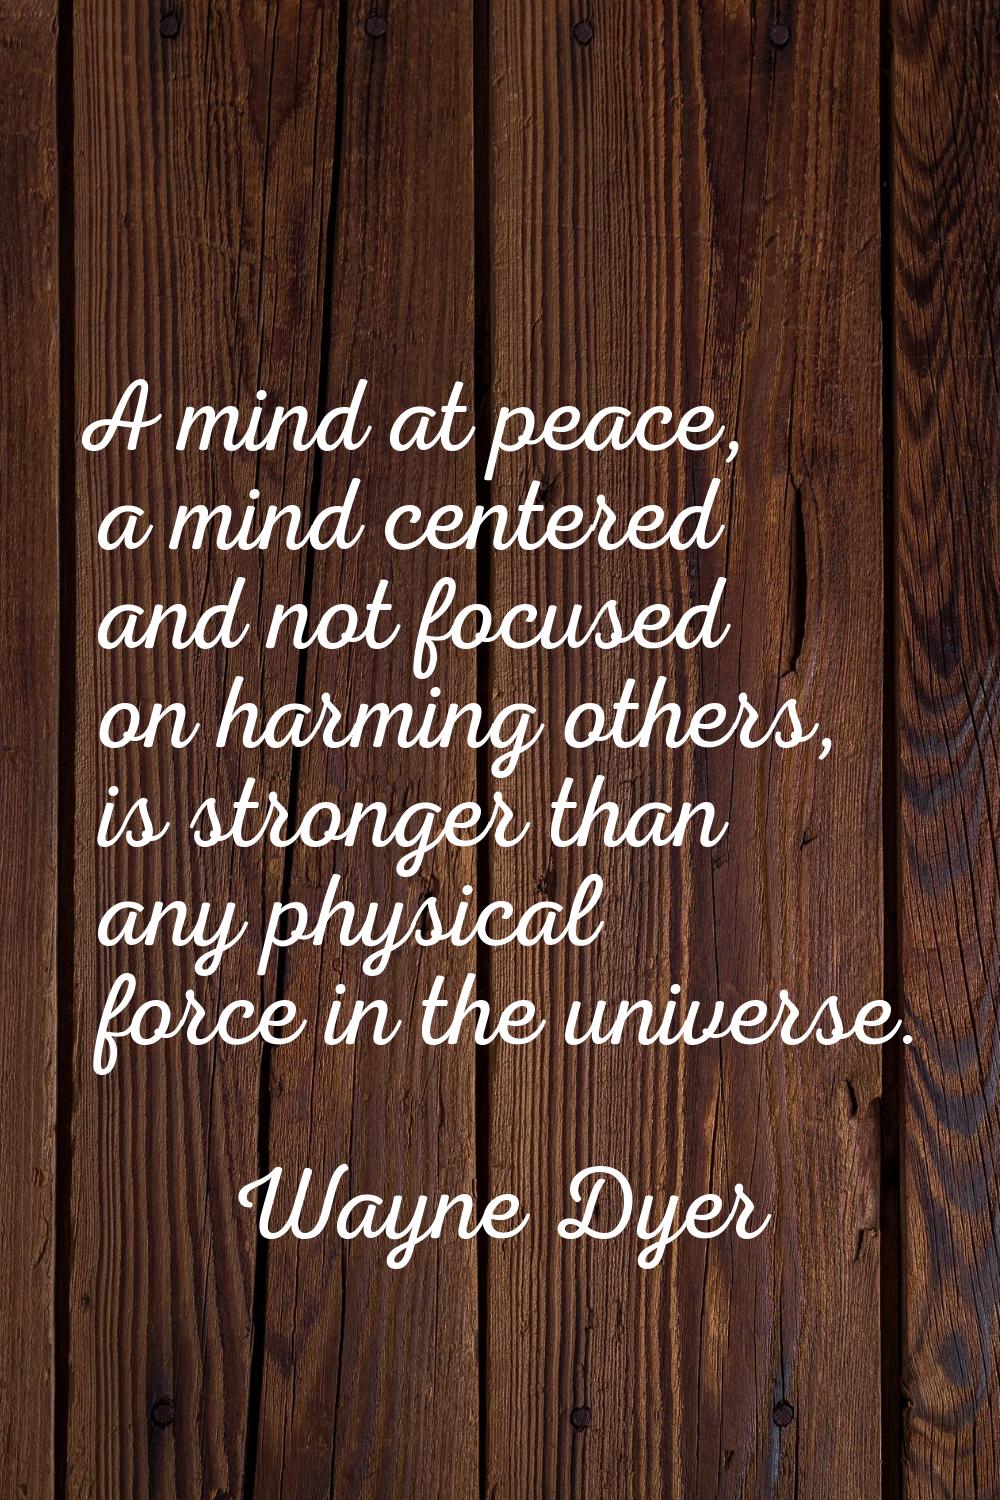 A mind at peace, a mind centered and not focused on harming others, is stronger than any physical f